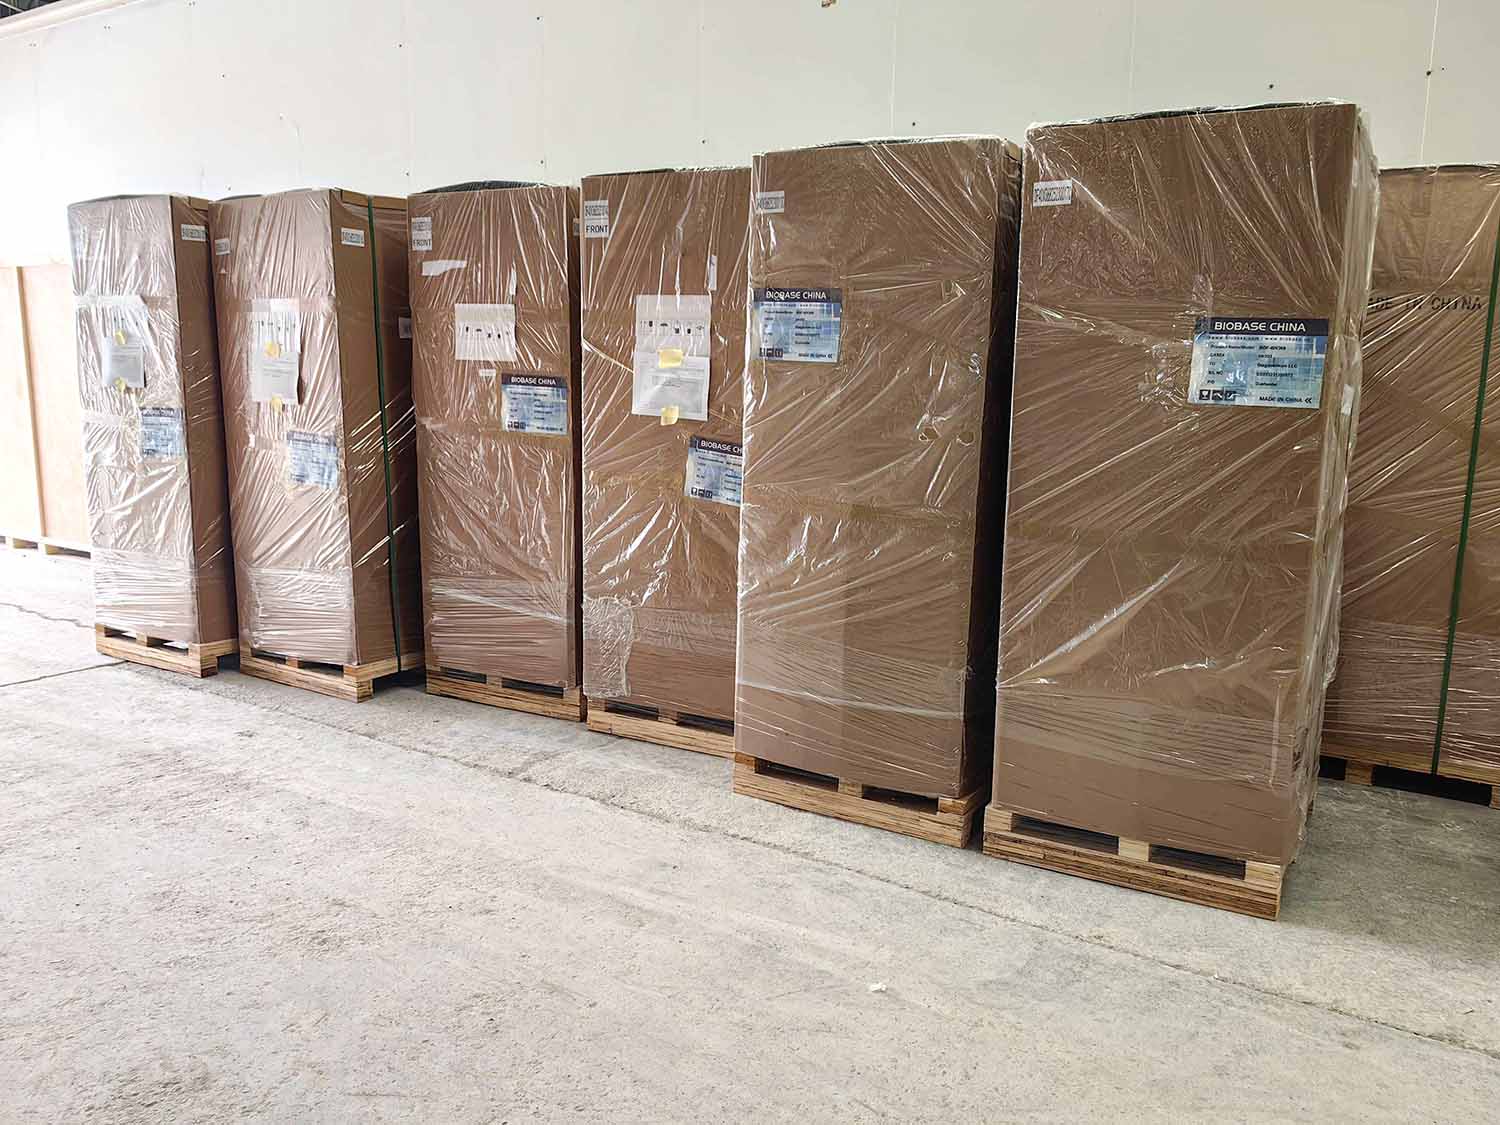 BIOBASE sent more than 300 medical equipment to Central Asia